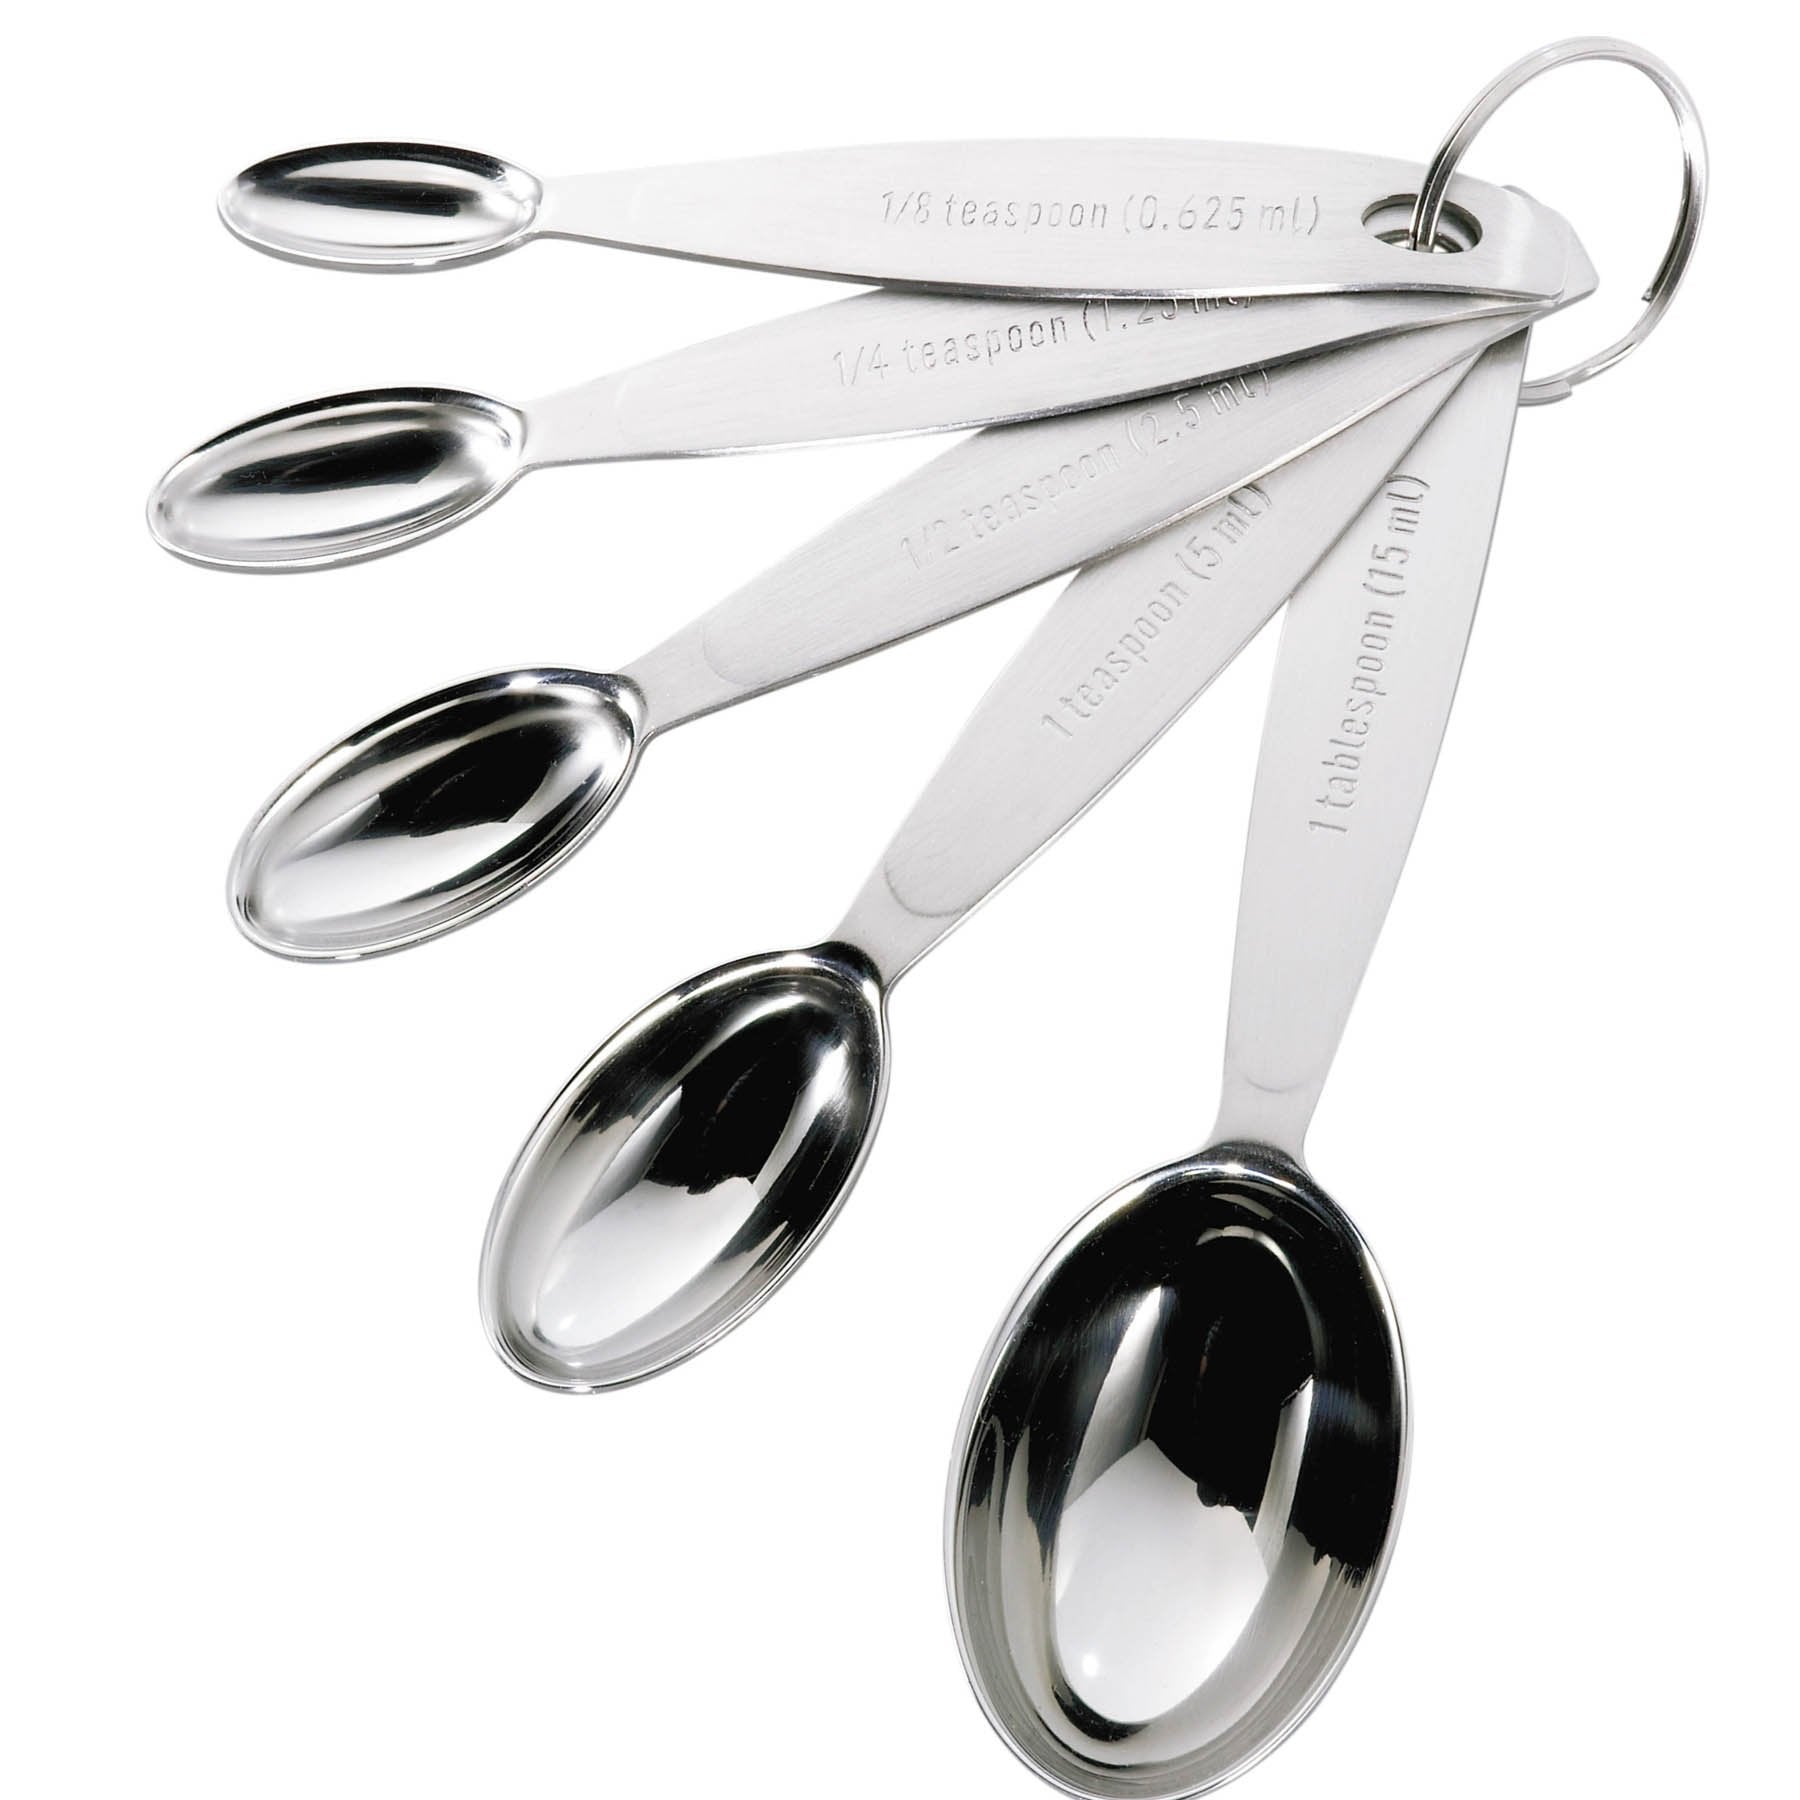 Tibroni Magnetic Measuring Spoons Set, 9 Pieces Stainless Steel 18/8  Teaspoon Measuring Spoons S - Measuring Cups & Spoons, Facebook  Marketplace